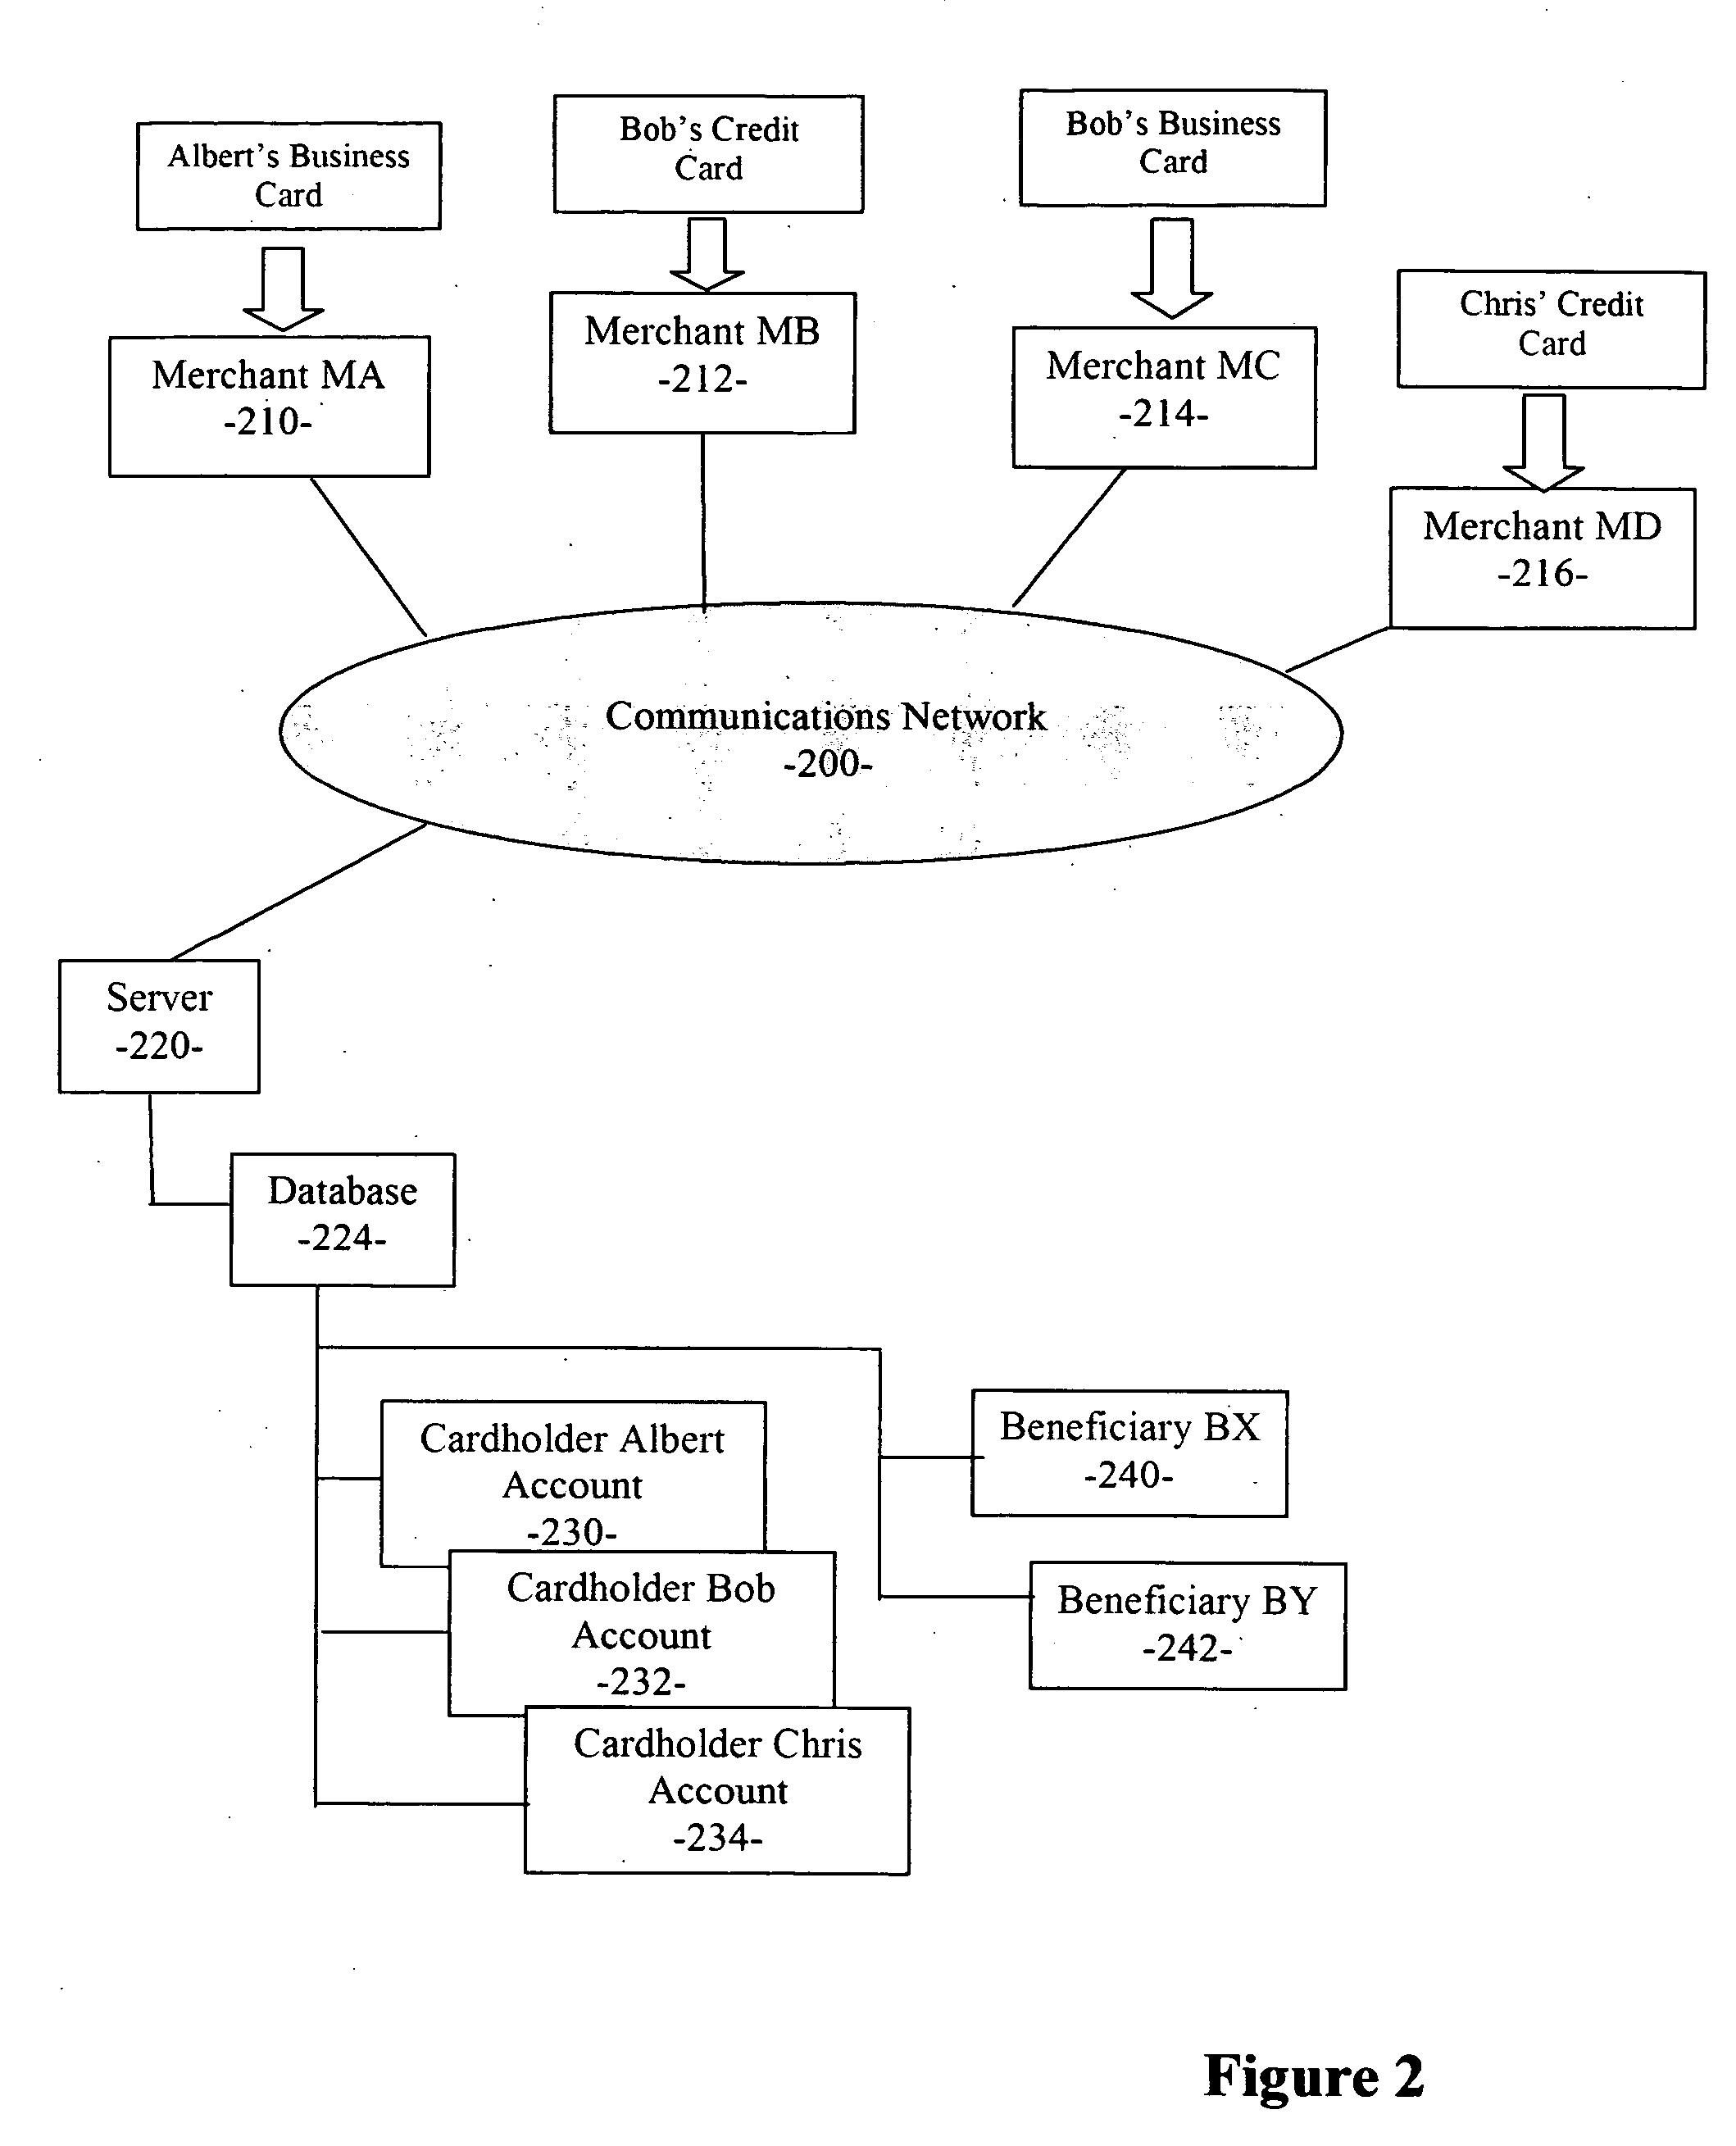 Method and system for multiple income-generating business card and referral network